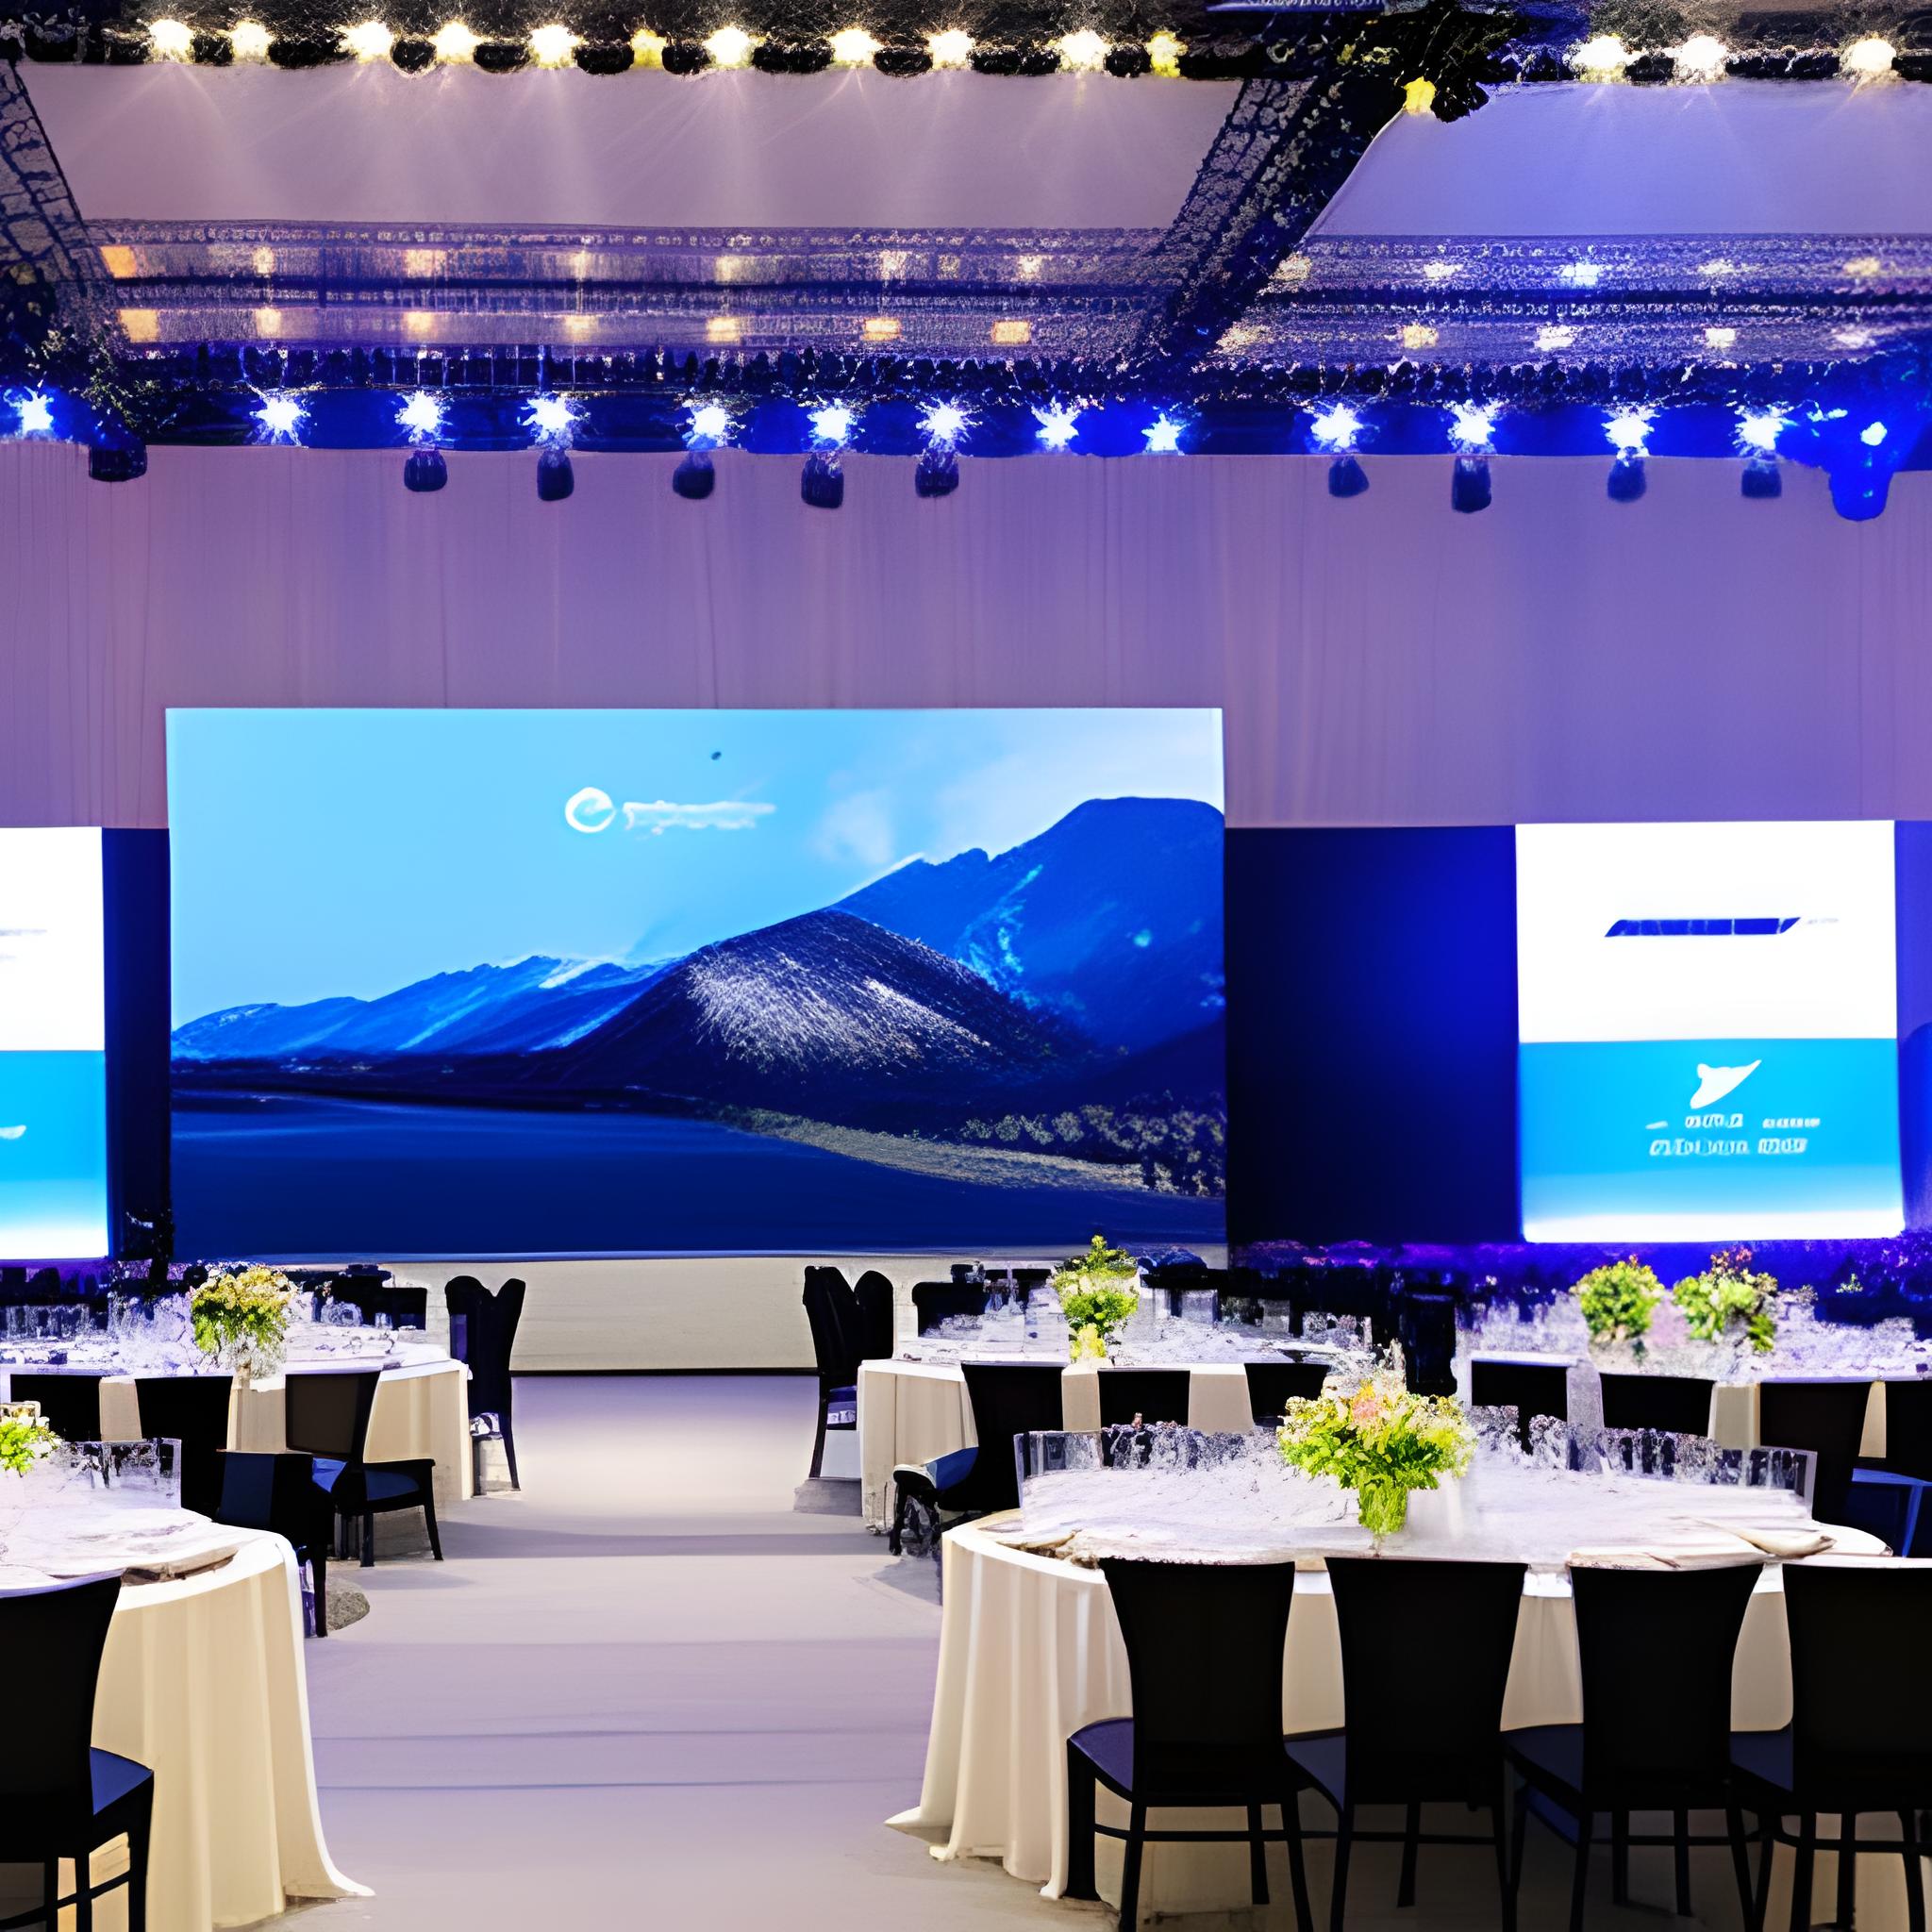 LED Screens shows videos placed in an event